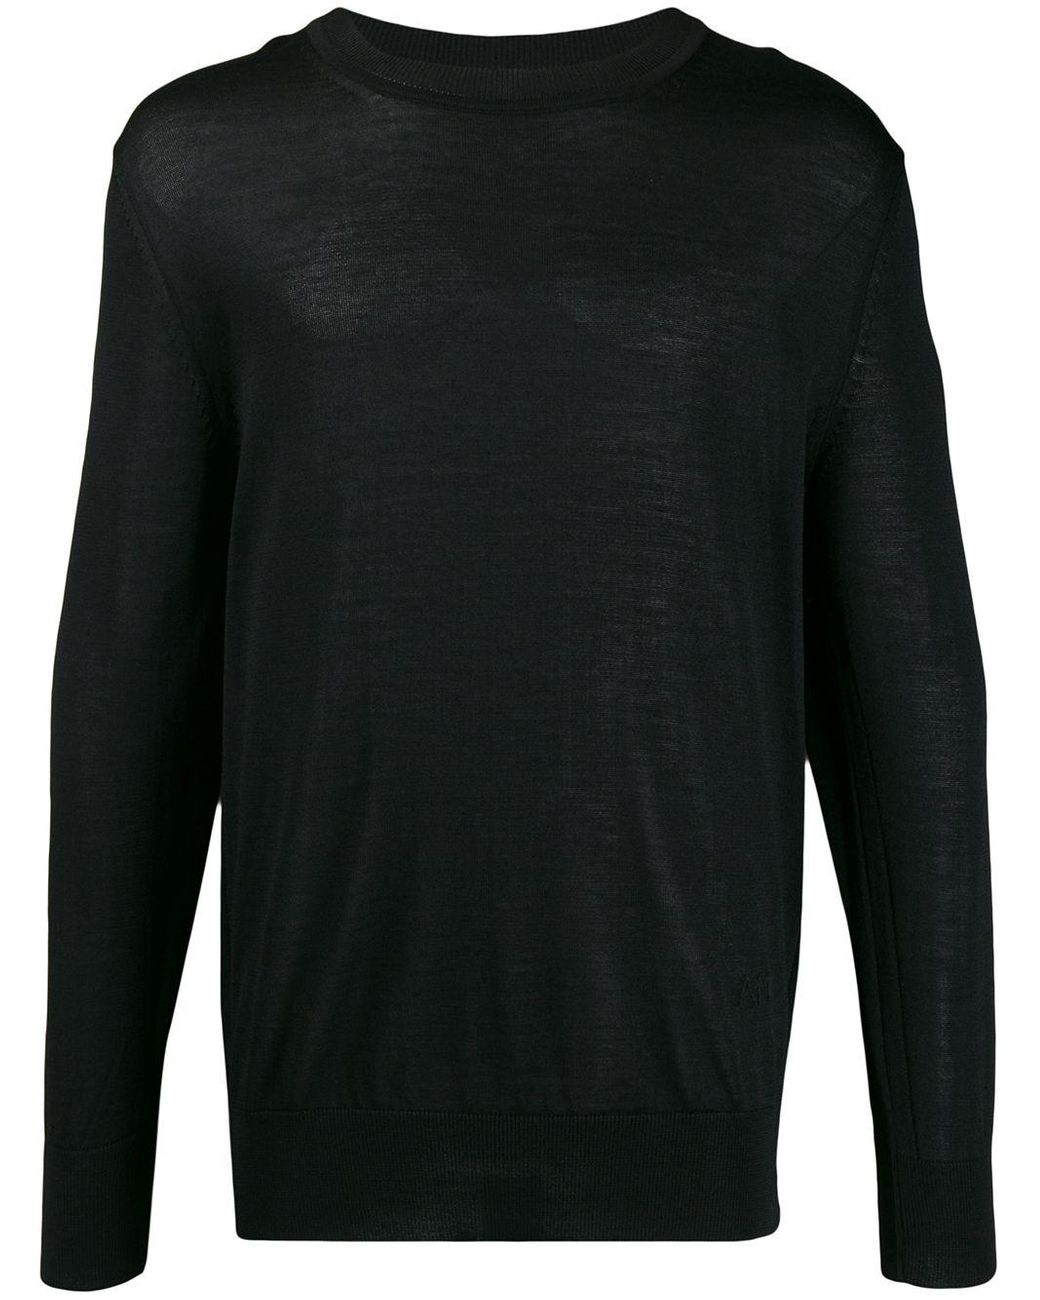 AMI Wool Ribbed Crew Neck Knitted Jumper in Black for Men - Lyst